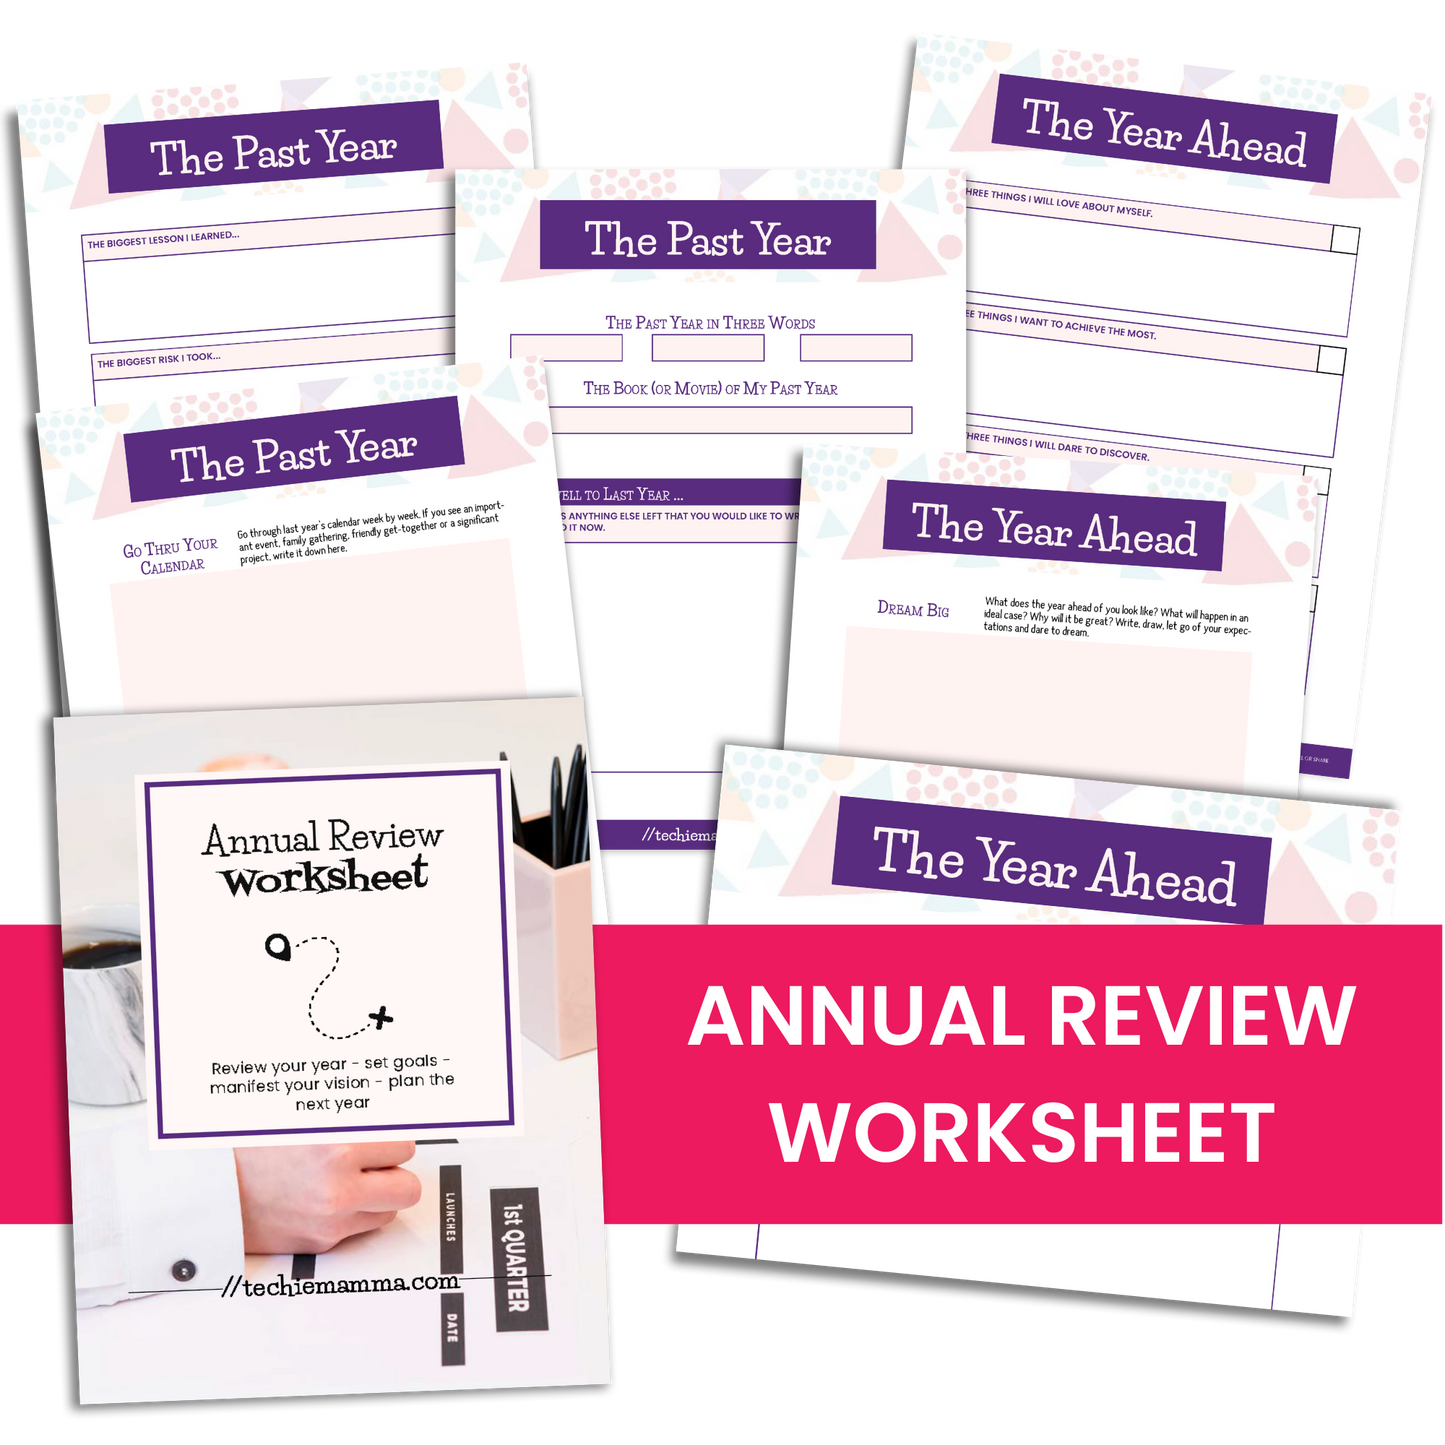 Annual Review Worksheet